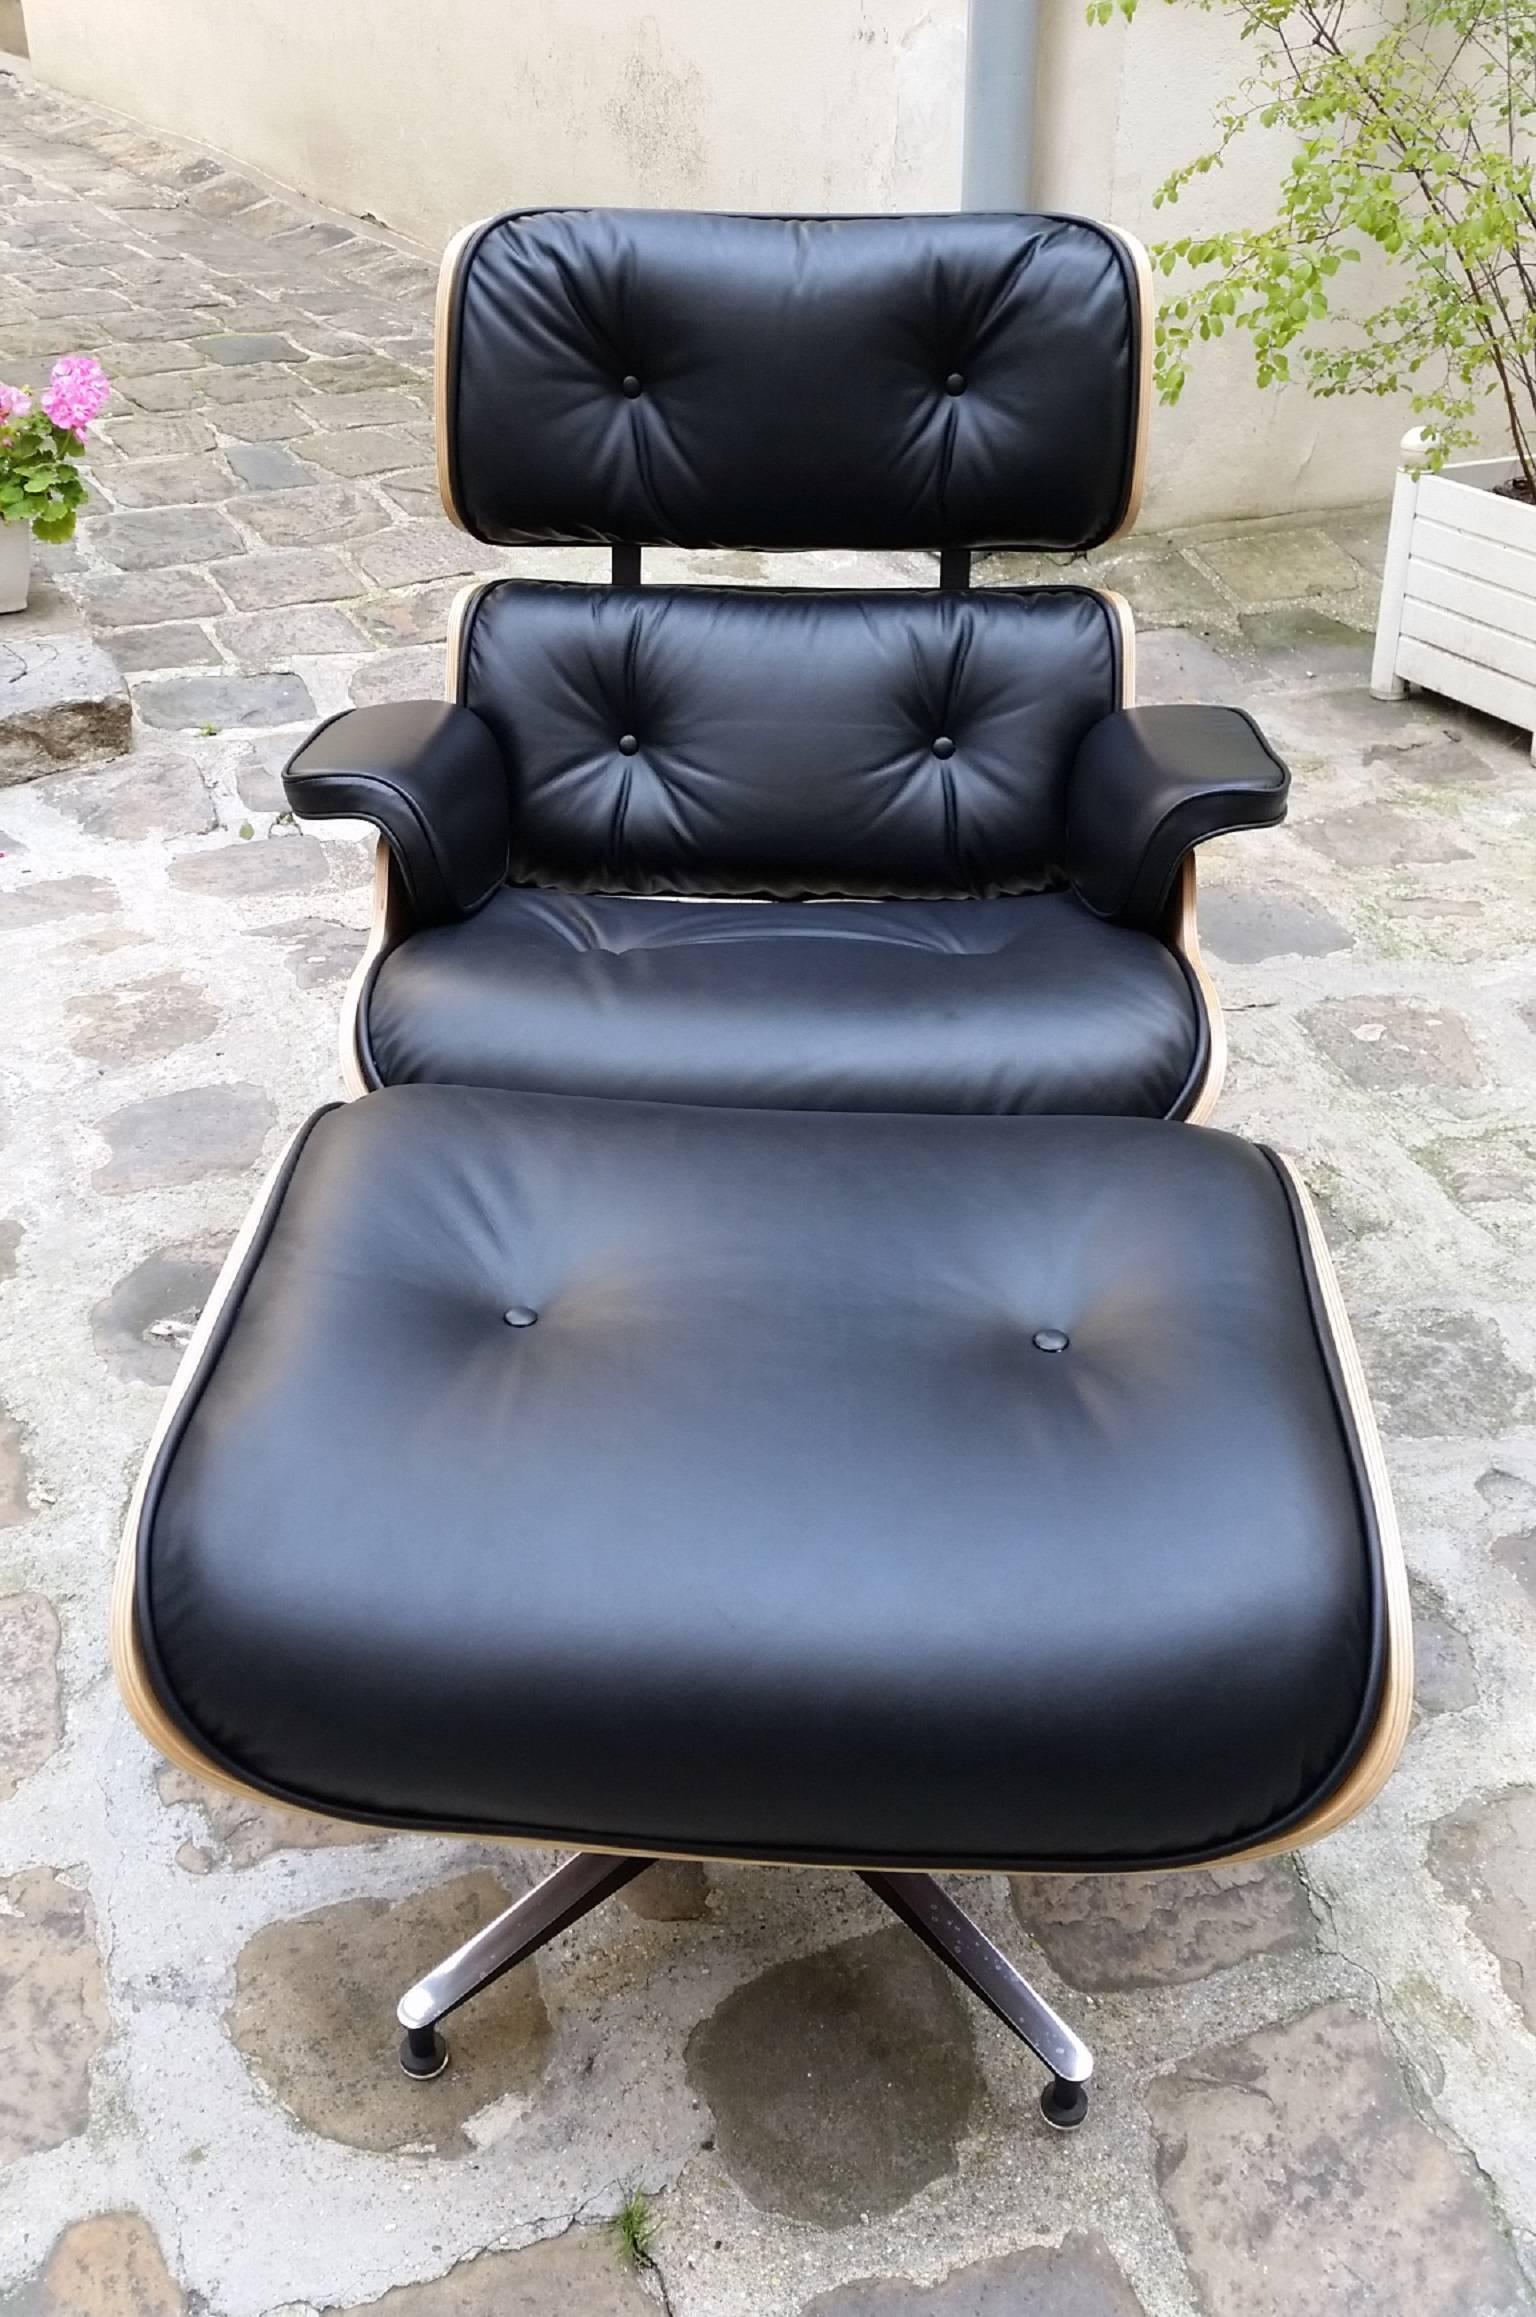 Edition Herman Miller
Armchair and ottoman set
Rosewood/black leather combination
In new condition.